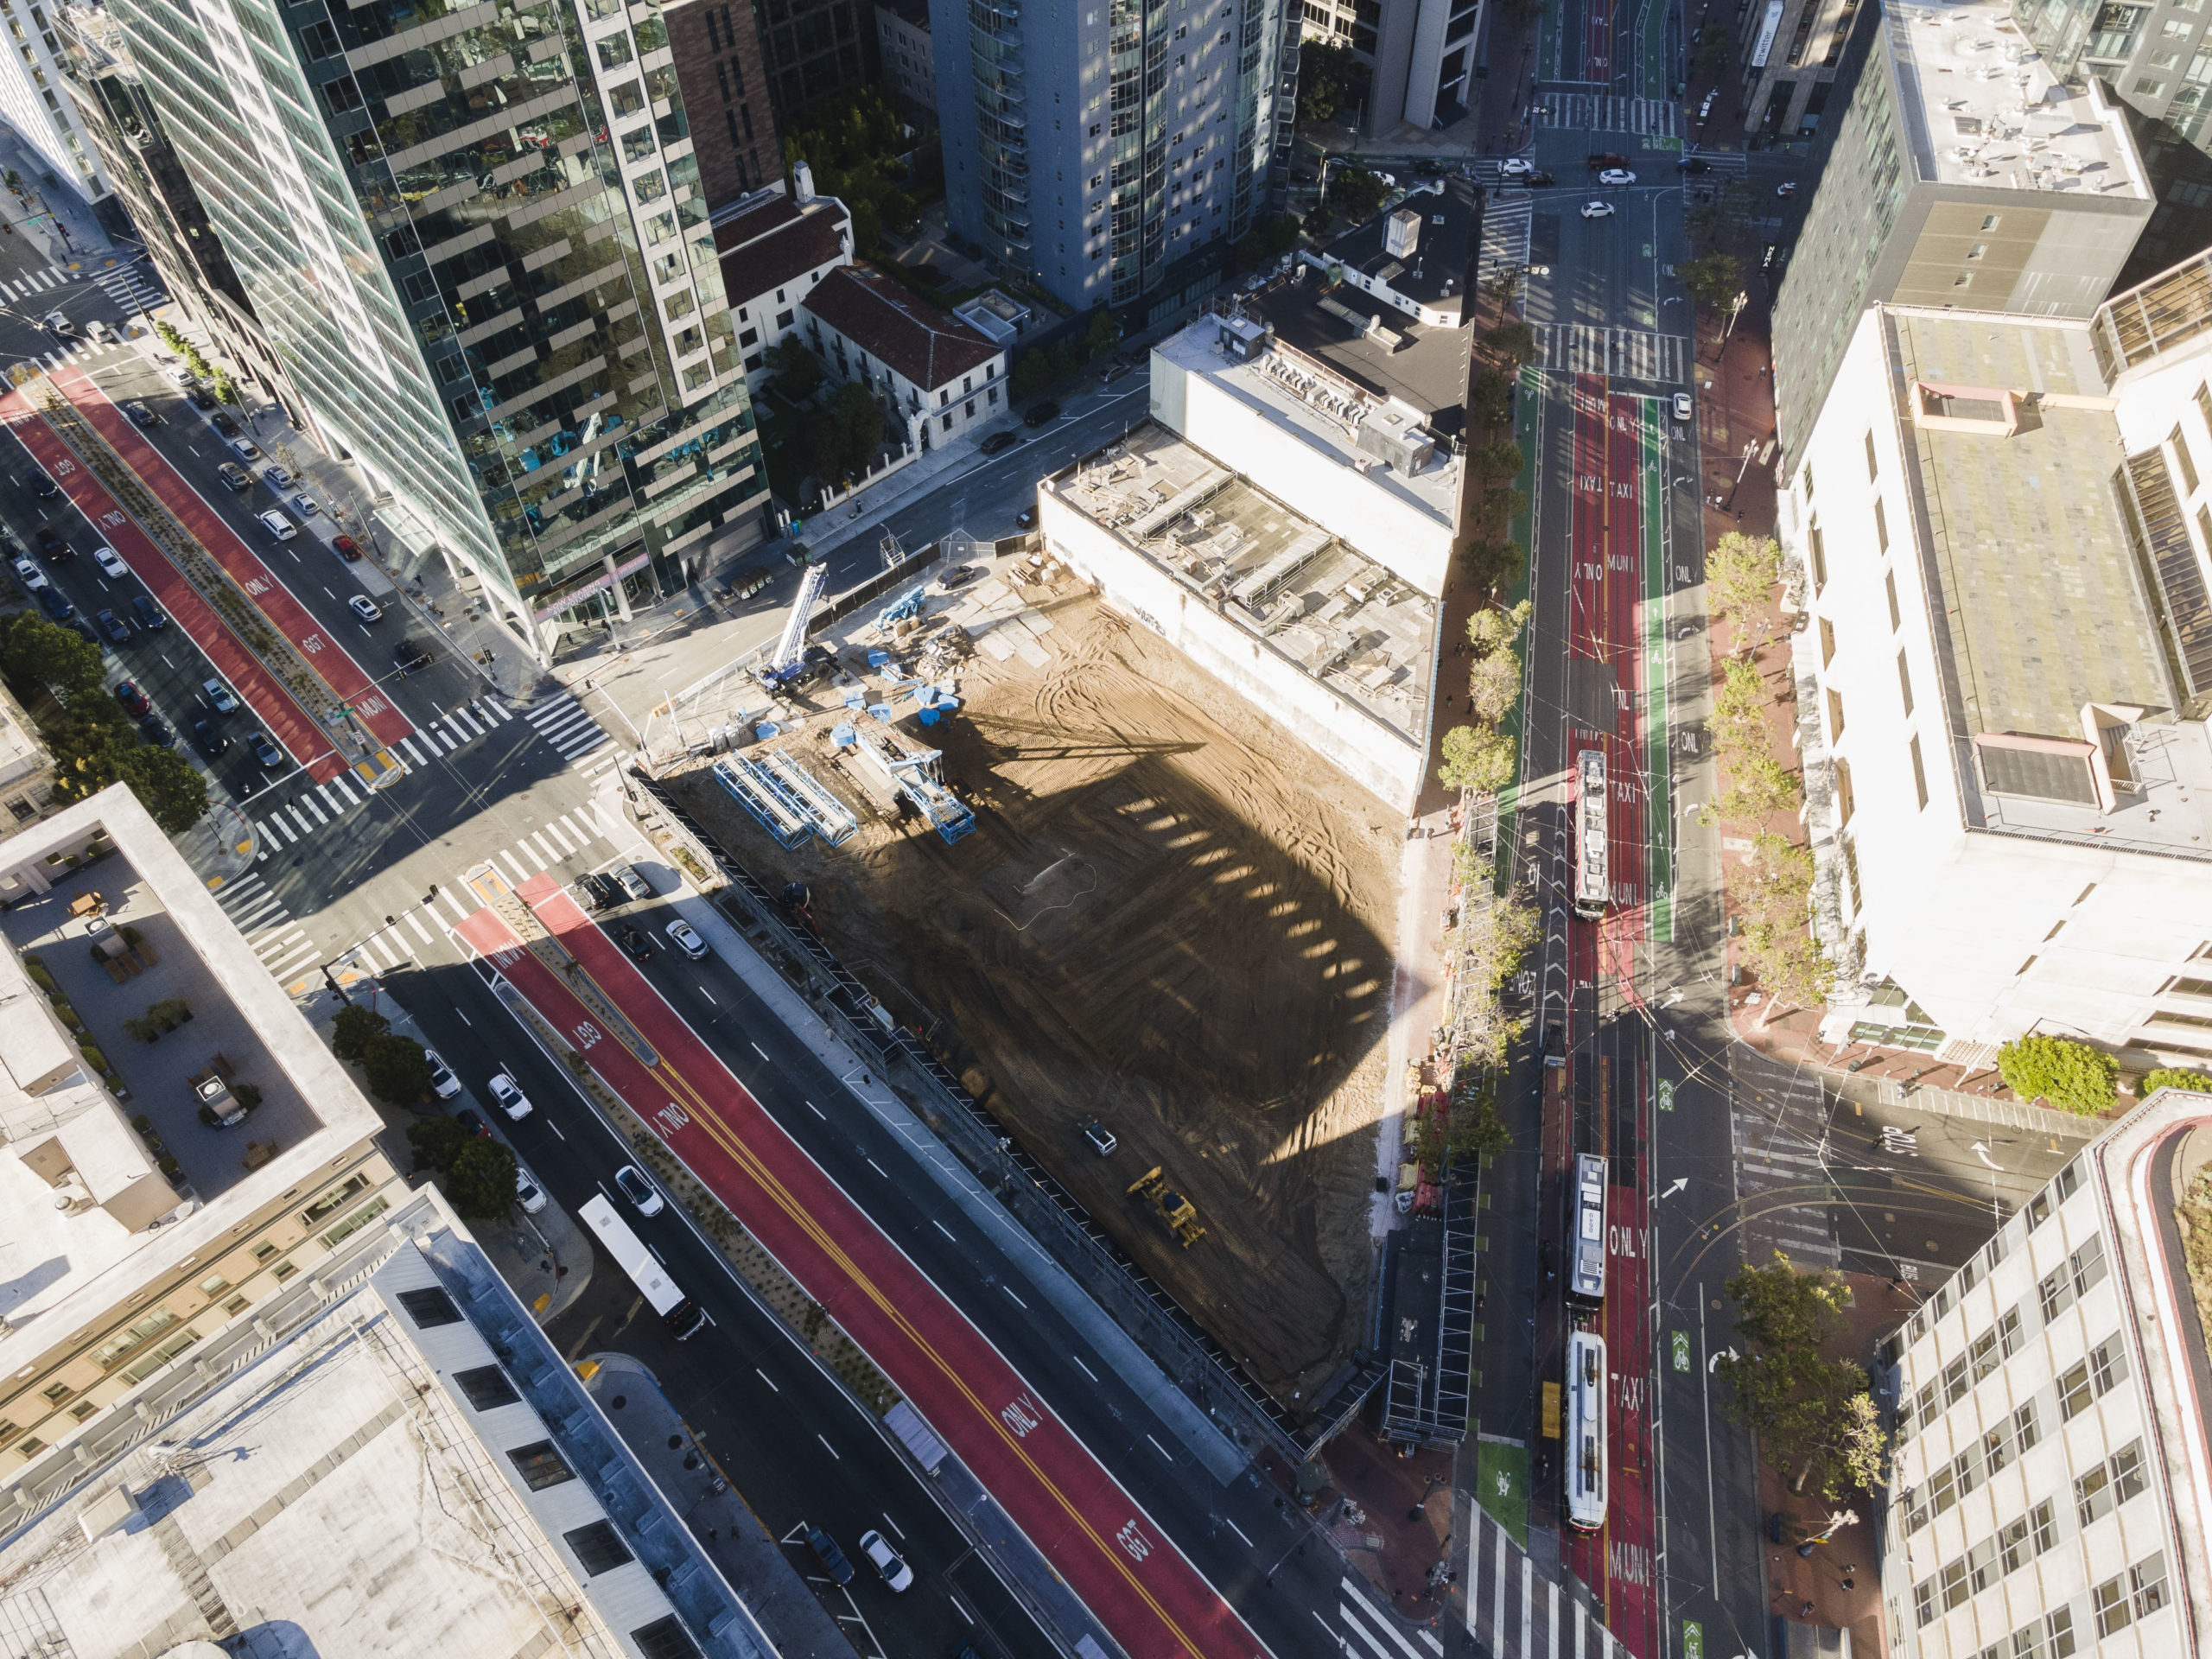 30 Van Ness Avenue crane parts on site, image by Andrew Campbell Nelson